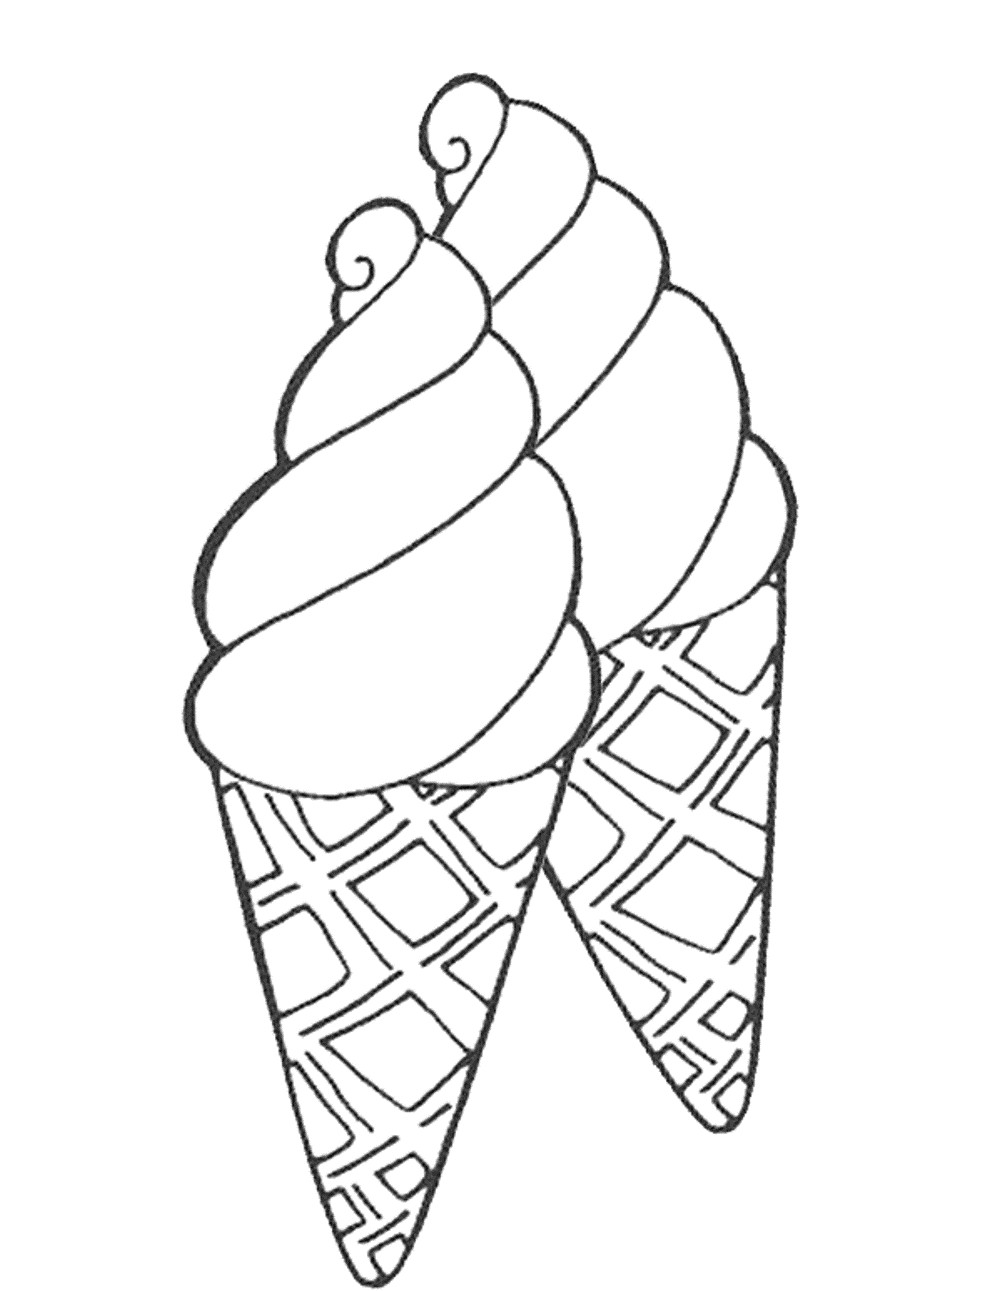 Printable Ice Cream Cone Coloring Pages at GetColorings.com | Free